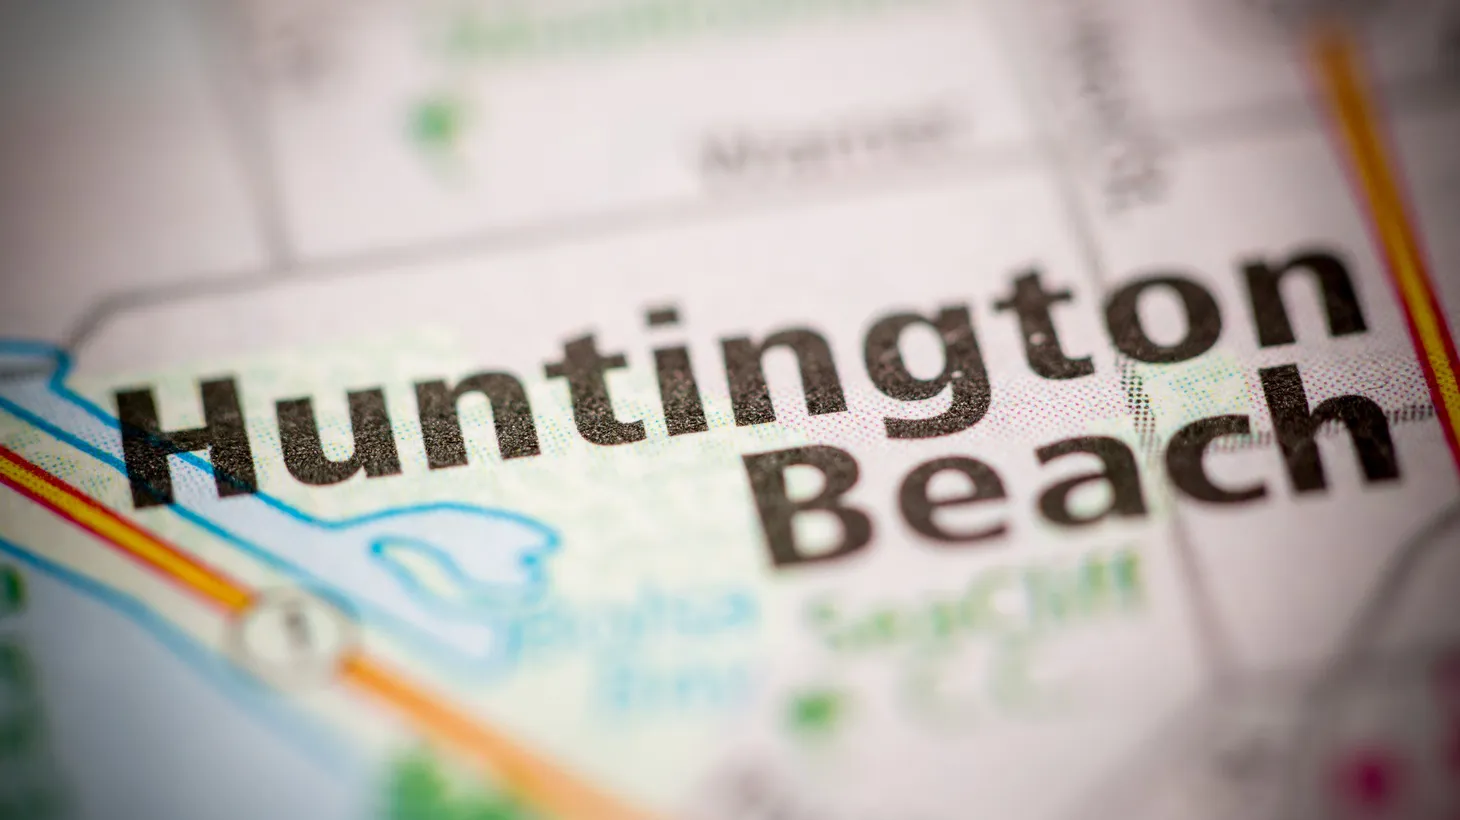 California's 47th congressional district includes Huntington Beach and Seal Beach.